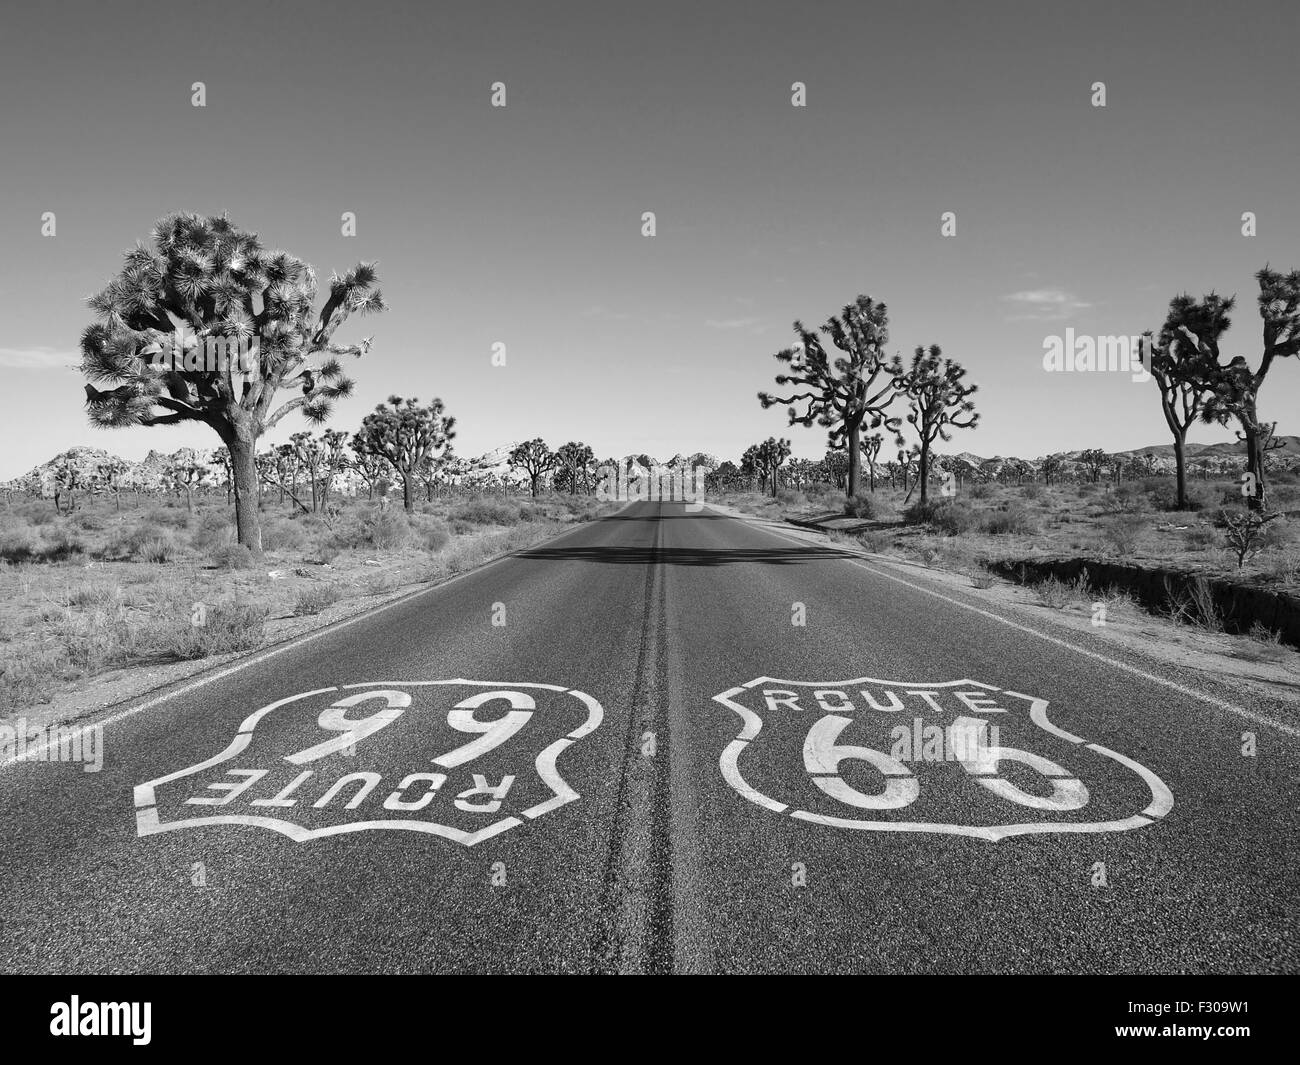 Mojave desert route 66 pavement sign with Joshua Trees in black and white. Stock Photo